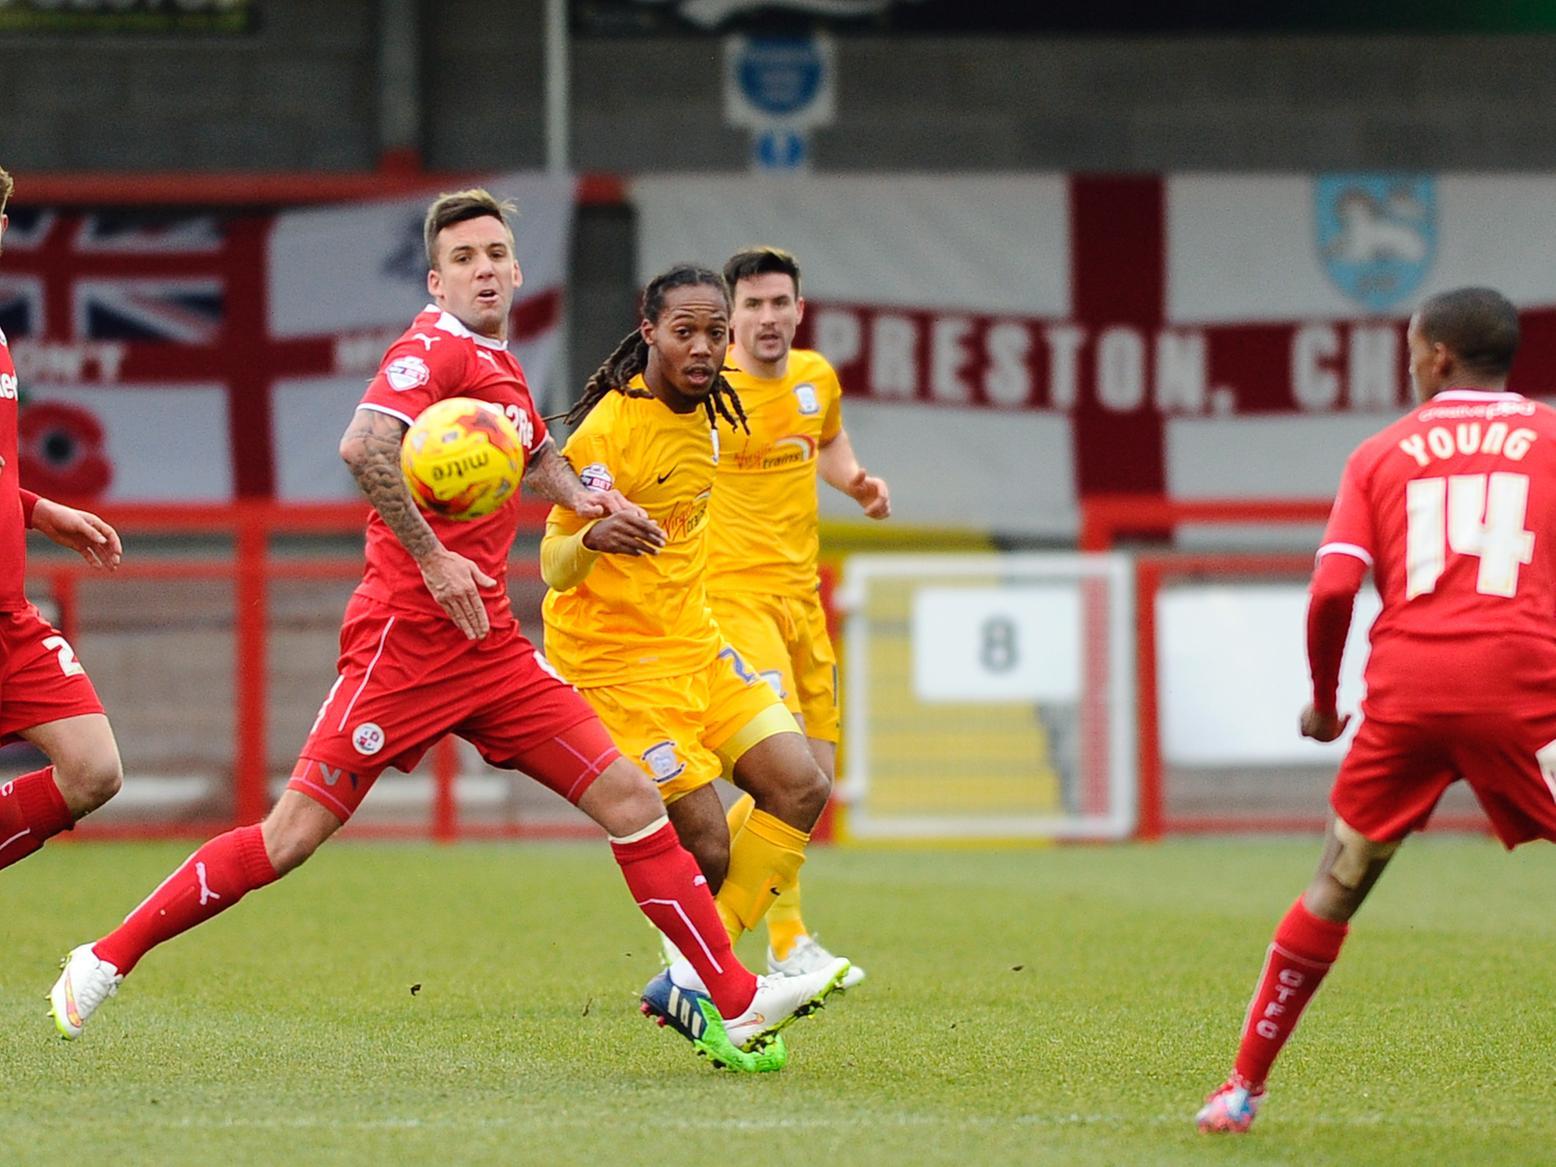 Daniel Johnson on his PNE debut against Crawley Town in January 2015